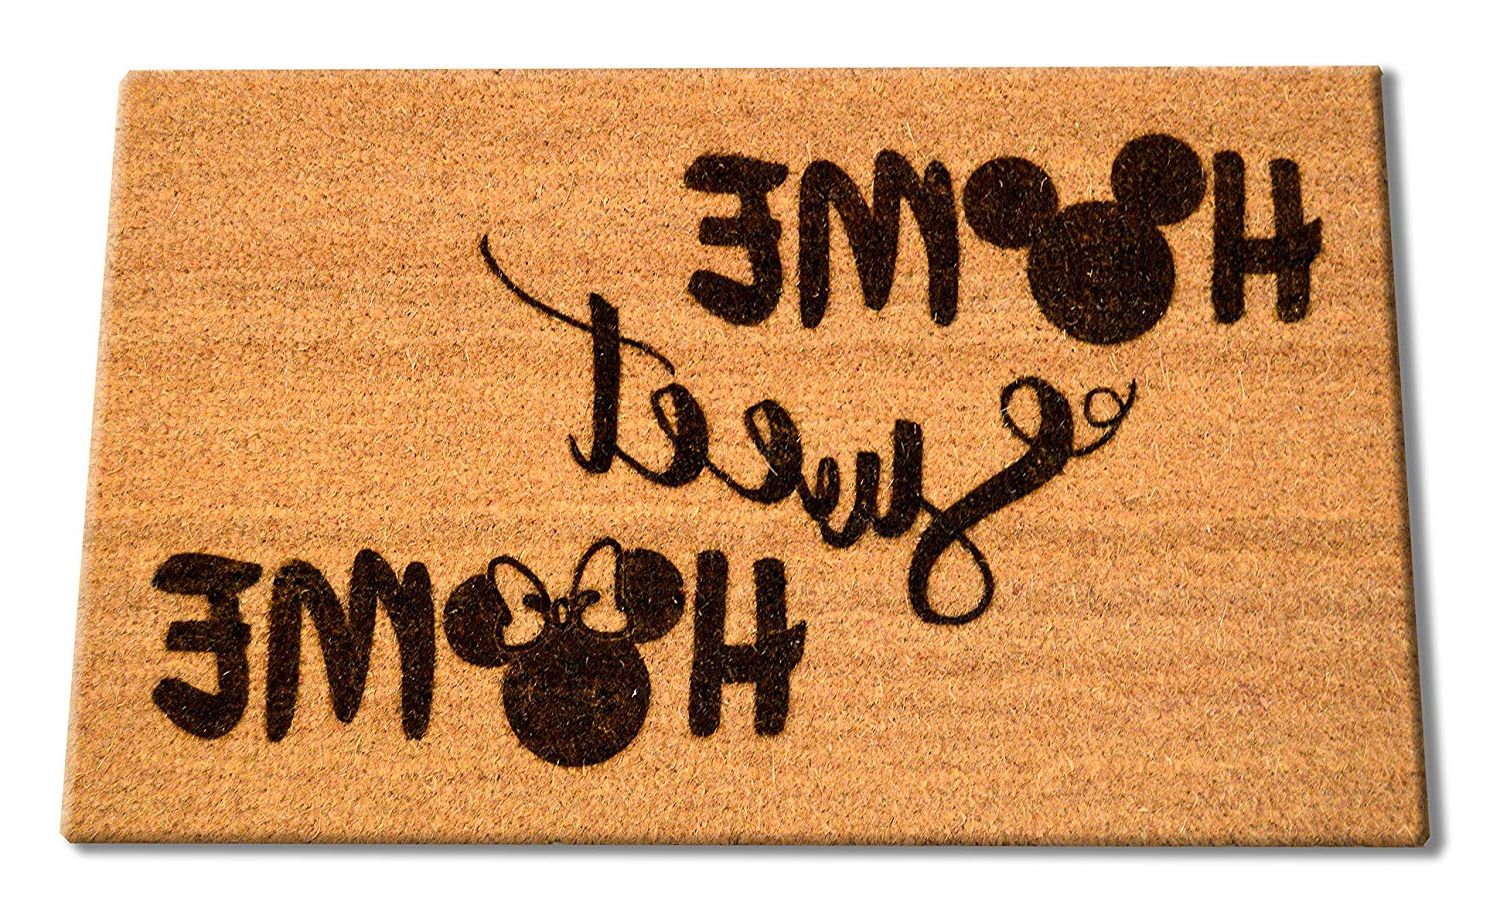 Laser Engraved Home Sweet Home Wall Decor Regarding Well Known Amazon : Disney Home Sweet Home Welcome Laser Engraved Coir (View 20 of 20)